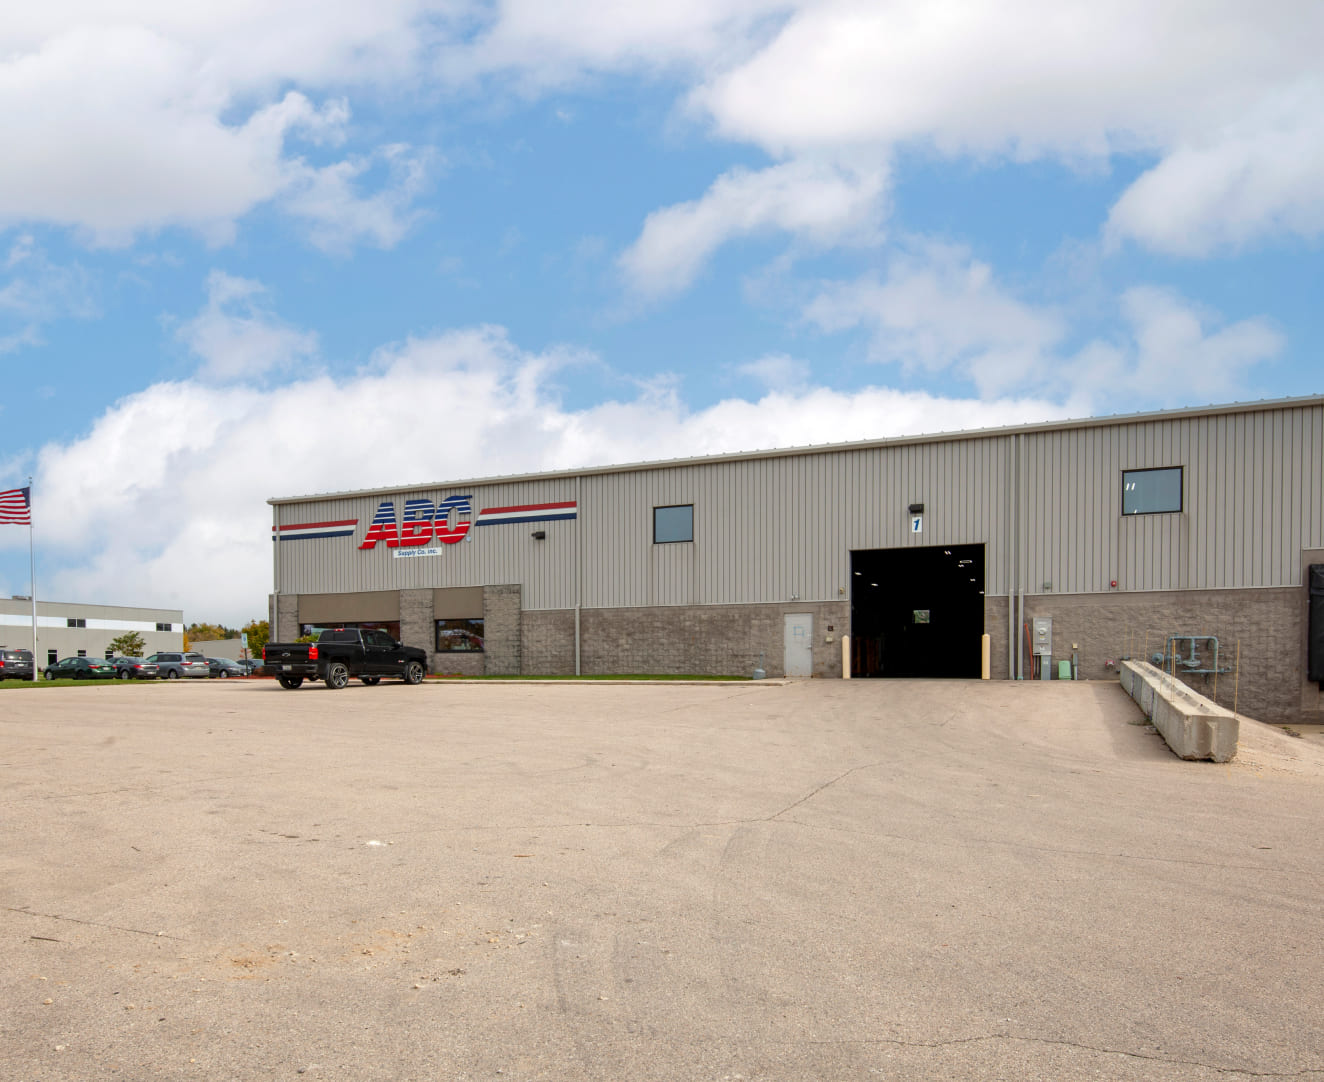 The parking lot and loading docks of N174 W21221 Alcan Drive in Jackson, WI.